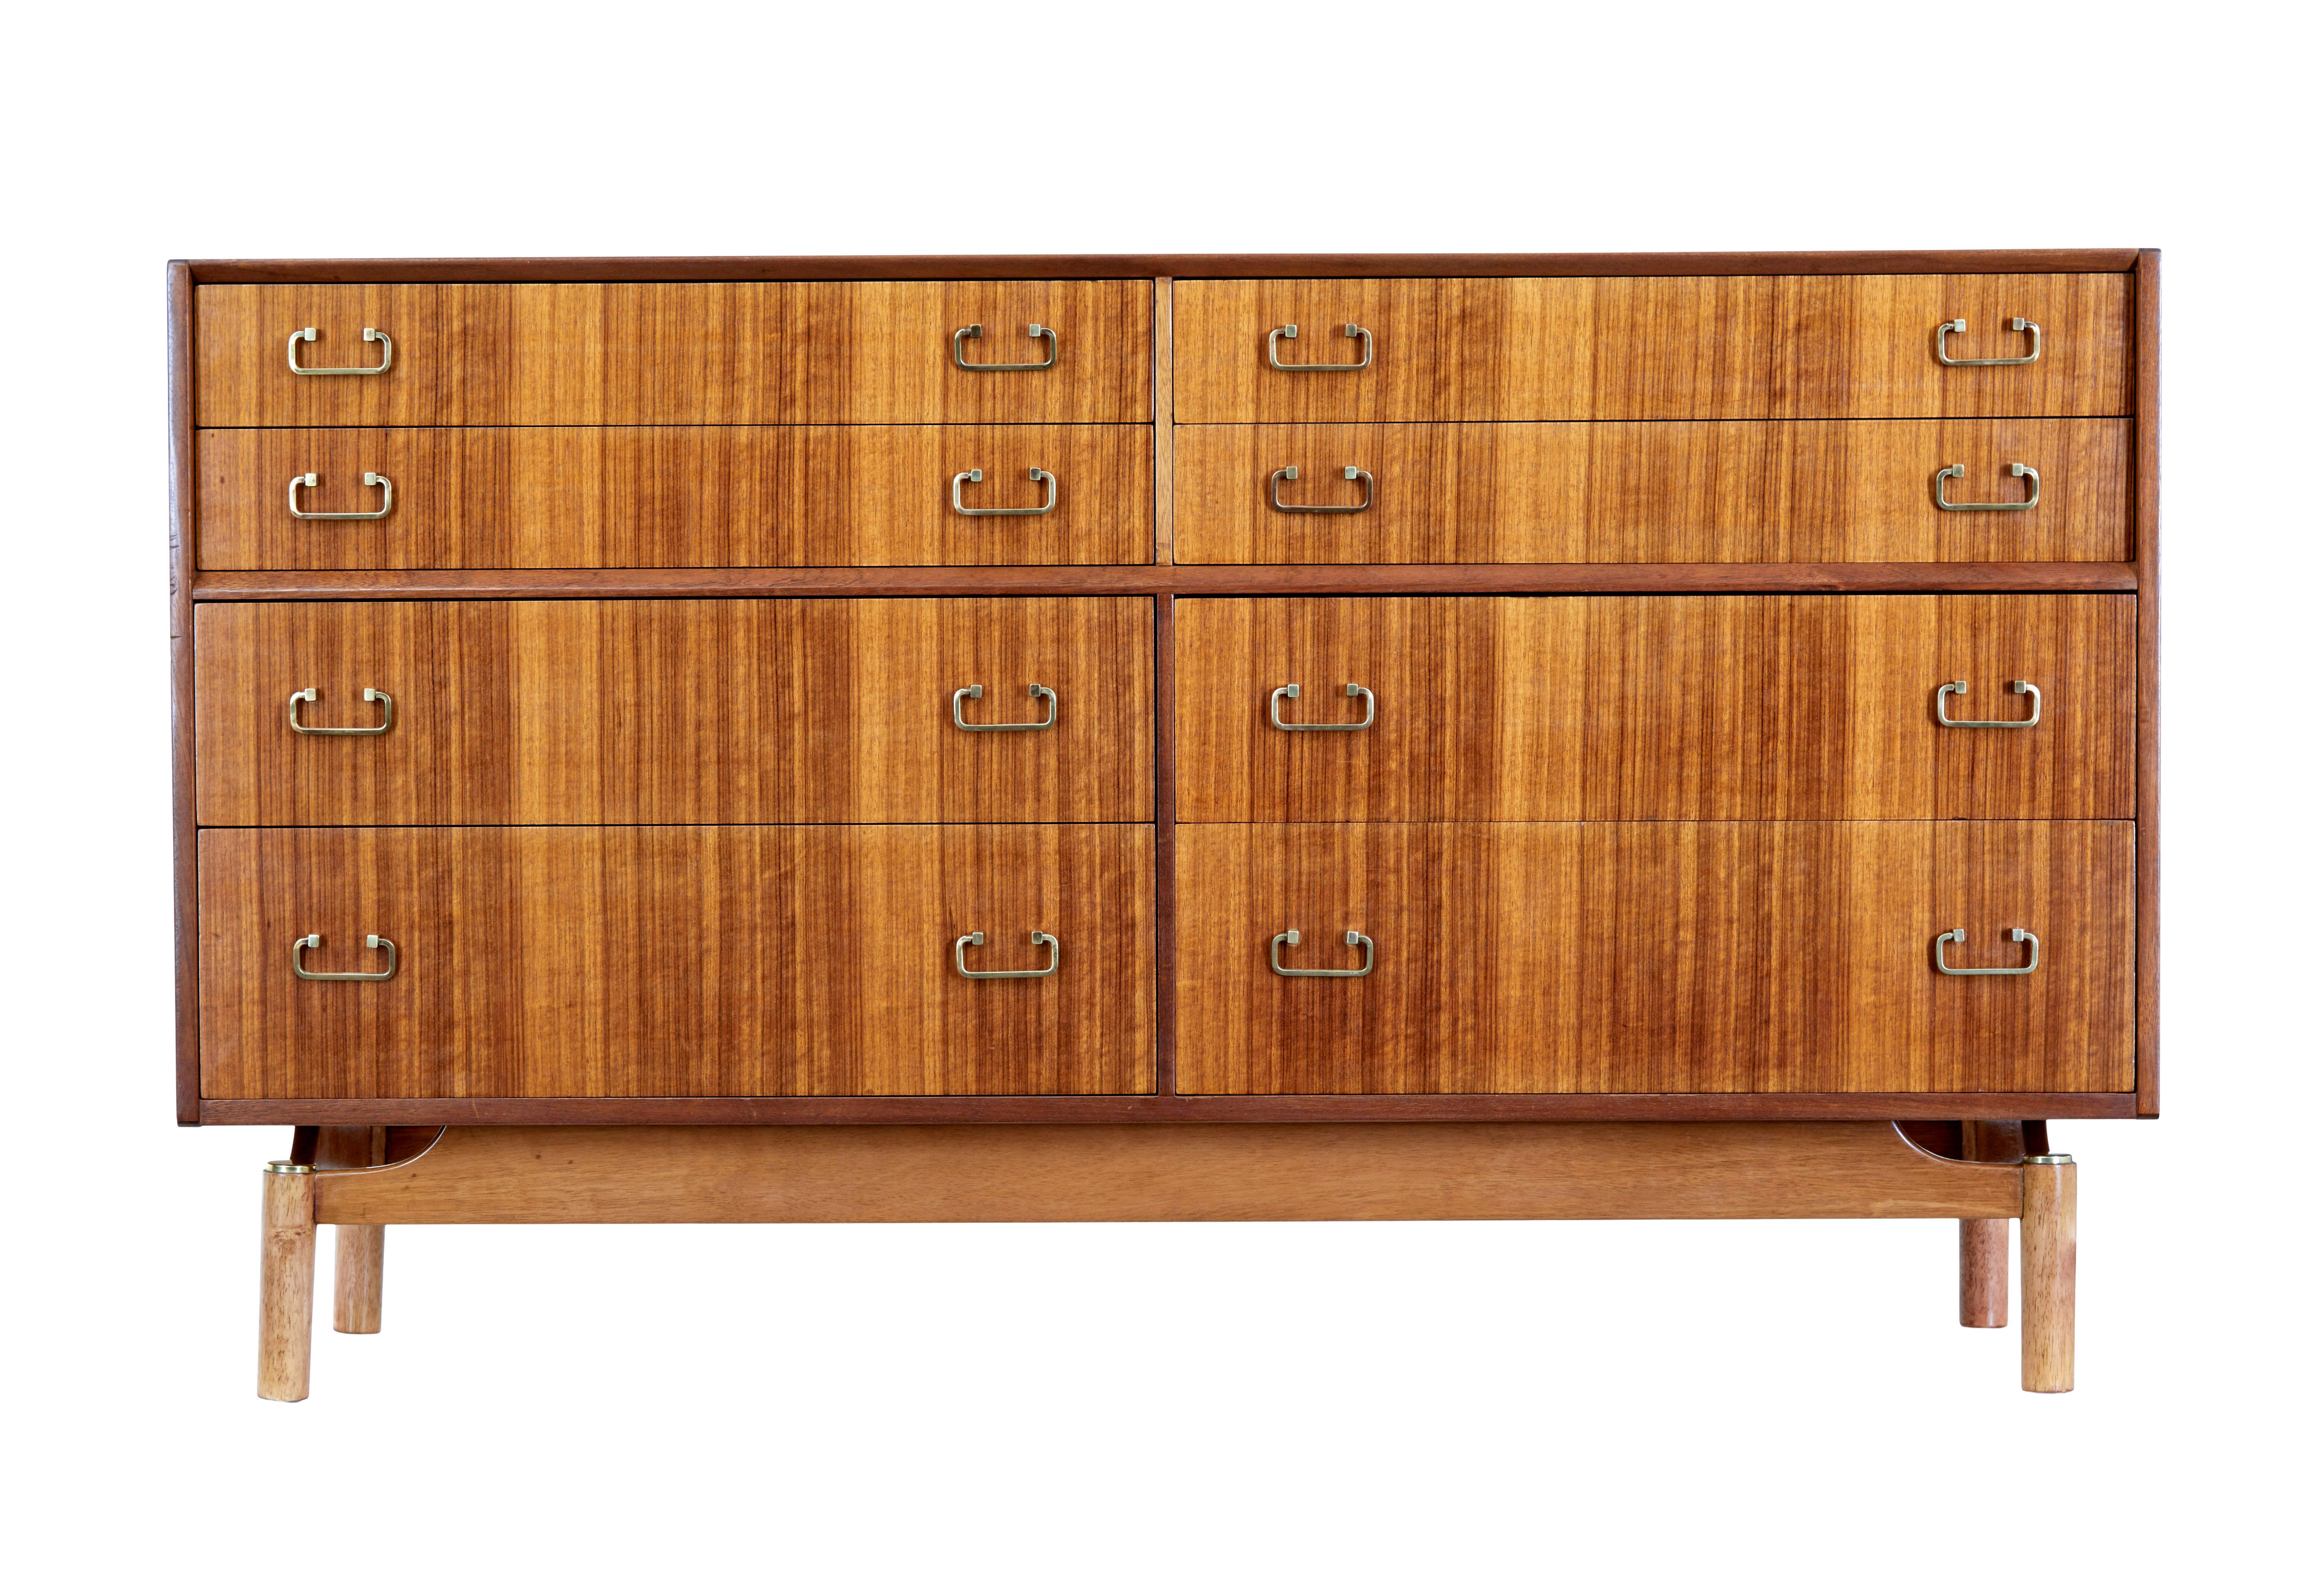 English midcentury teak sideboard circa late 1960s
Good quality and functional piece of furniture ready for everyday use.
Veneered in a striking teak grain. 1 piece, fitted with 4 drawers above a solid teak frame with a further 4 drawers below. This